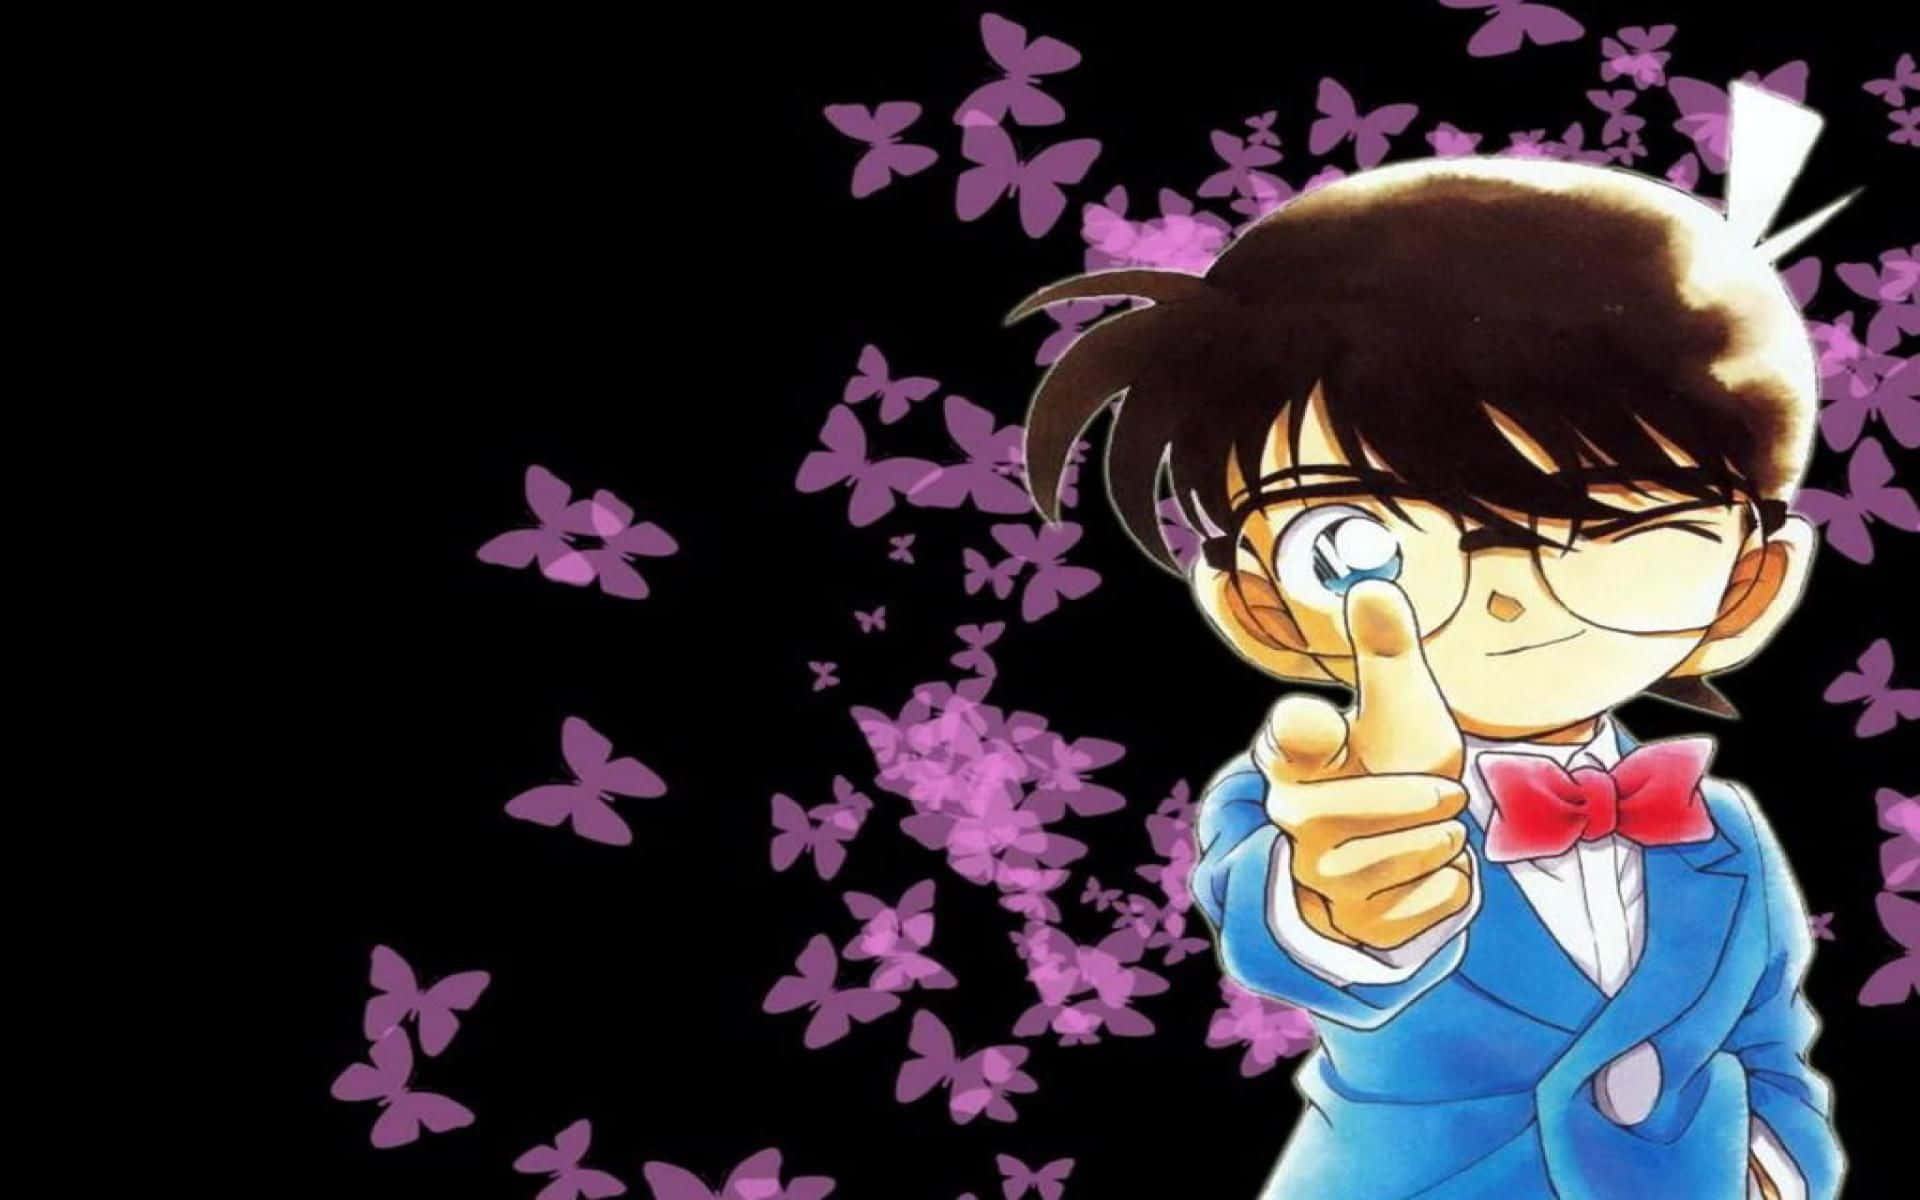 Detective Conan in deep thought